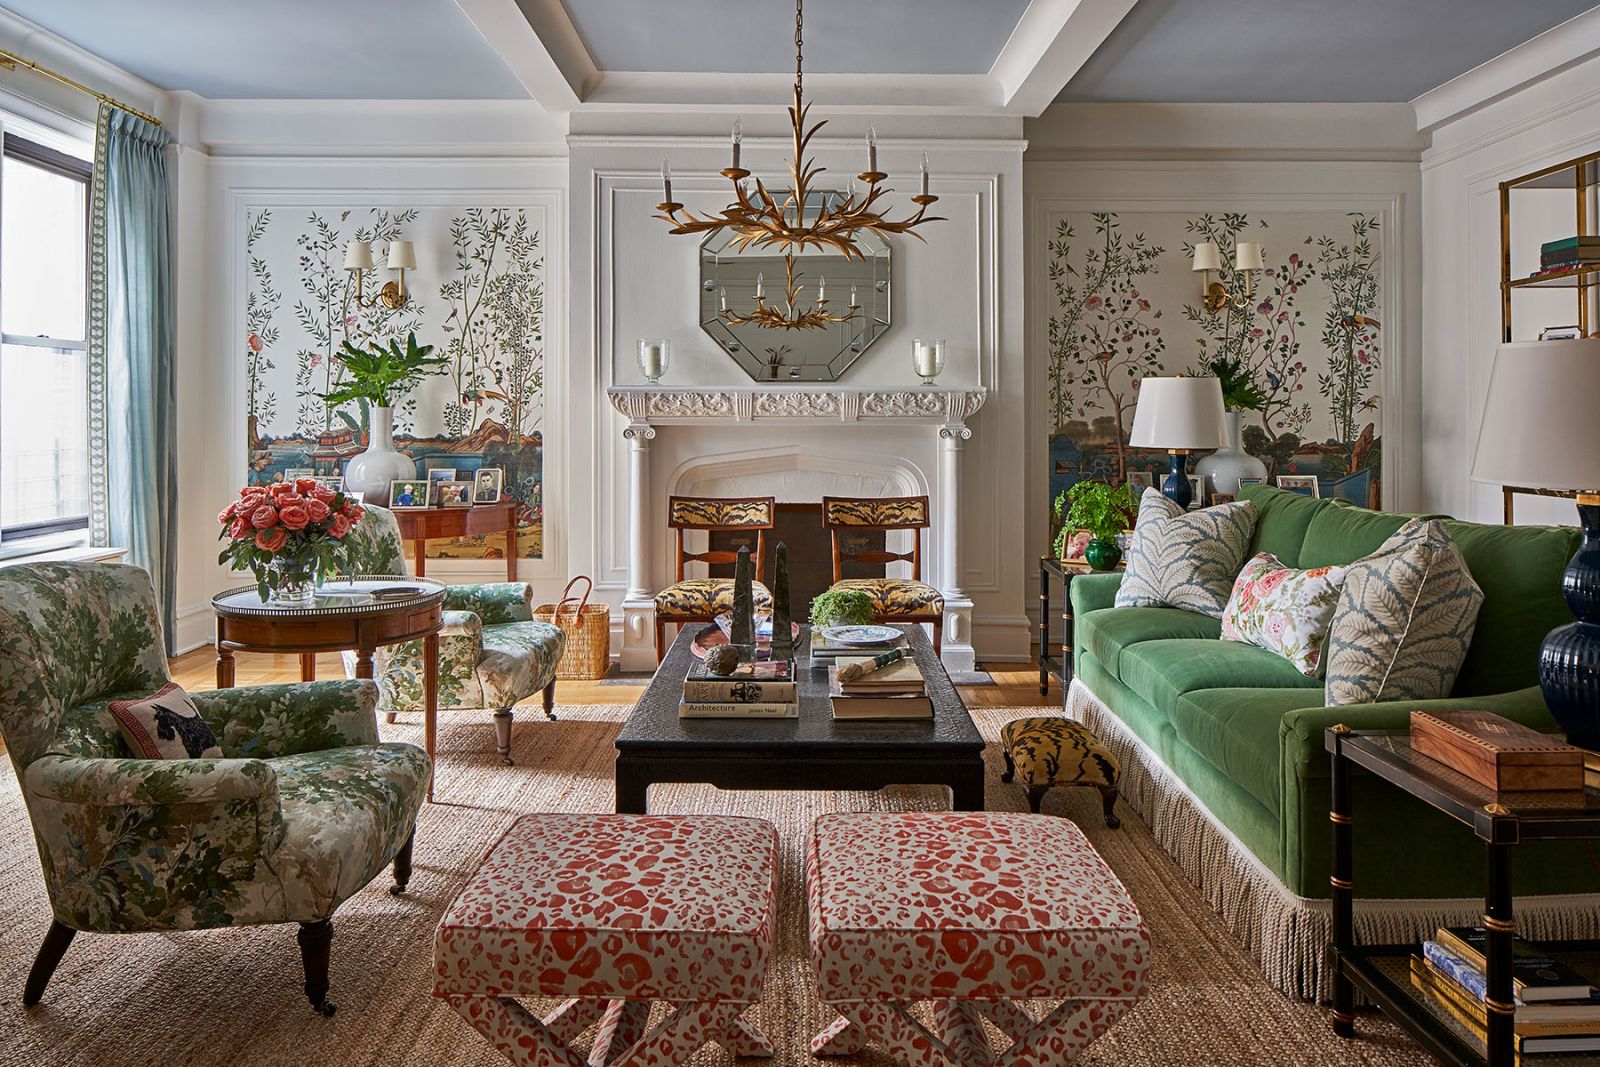 A Grandmillennial living room decorated with an elegant green velvet sofa, two floral upholstered chairs, a classic fireplace adorned with a heptagon mirror, and four accent chairs with wild upholstery